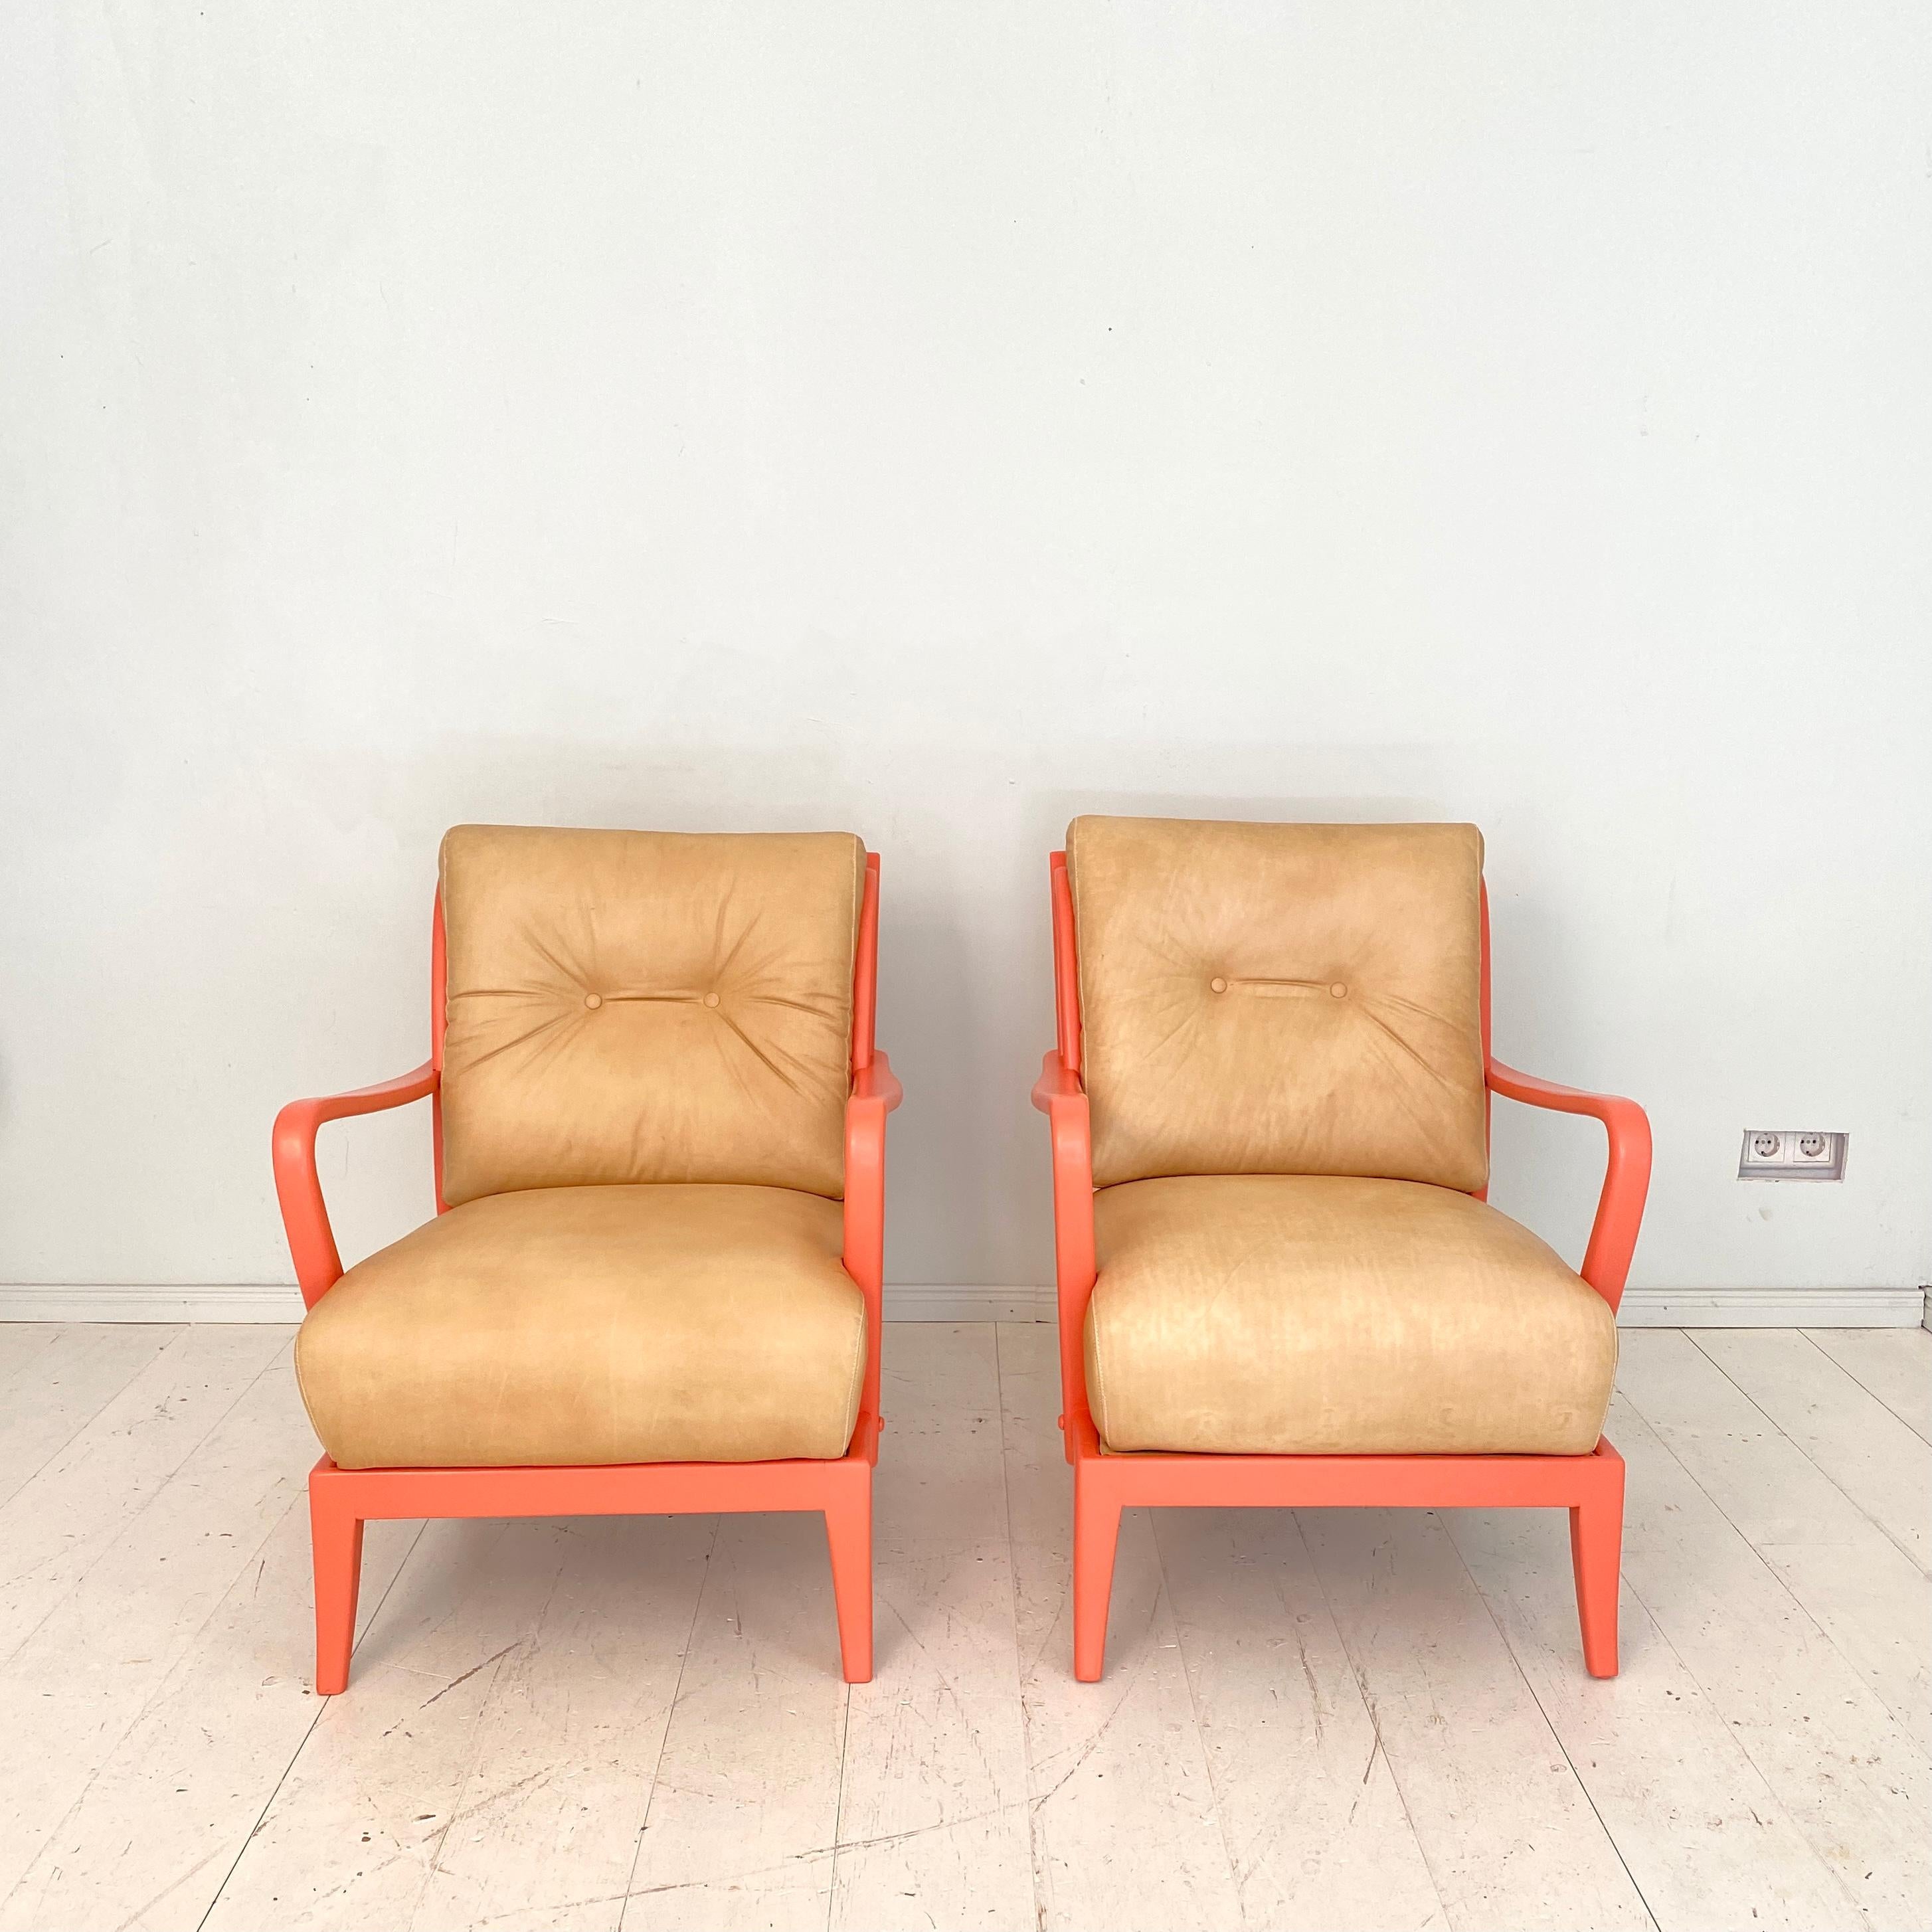 coral colored chairs